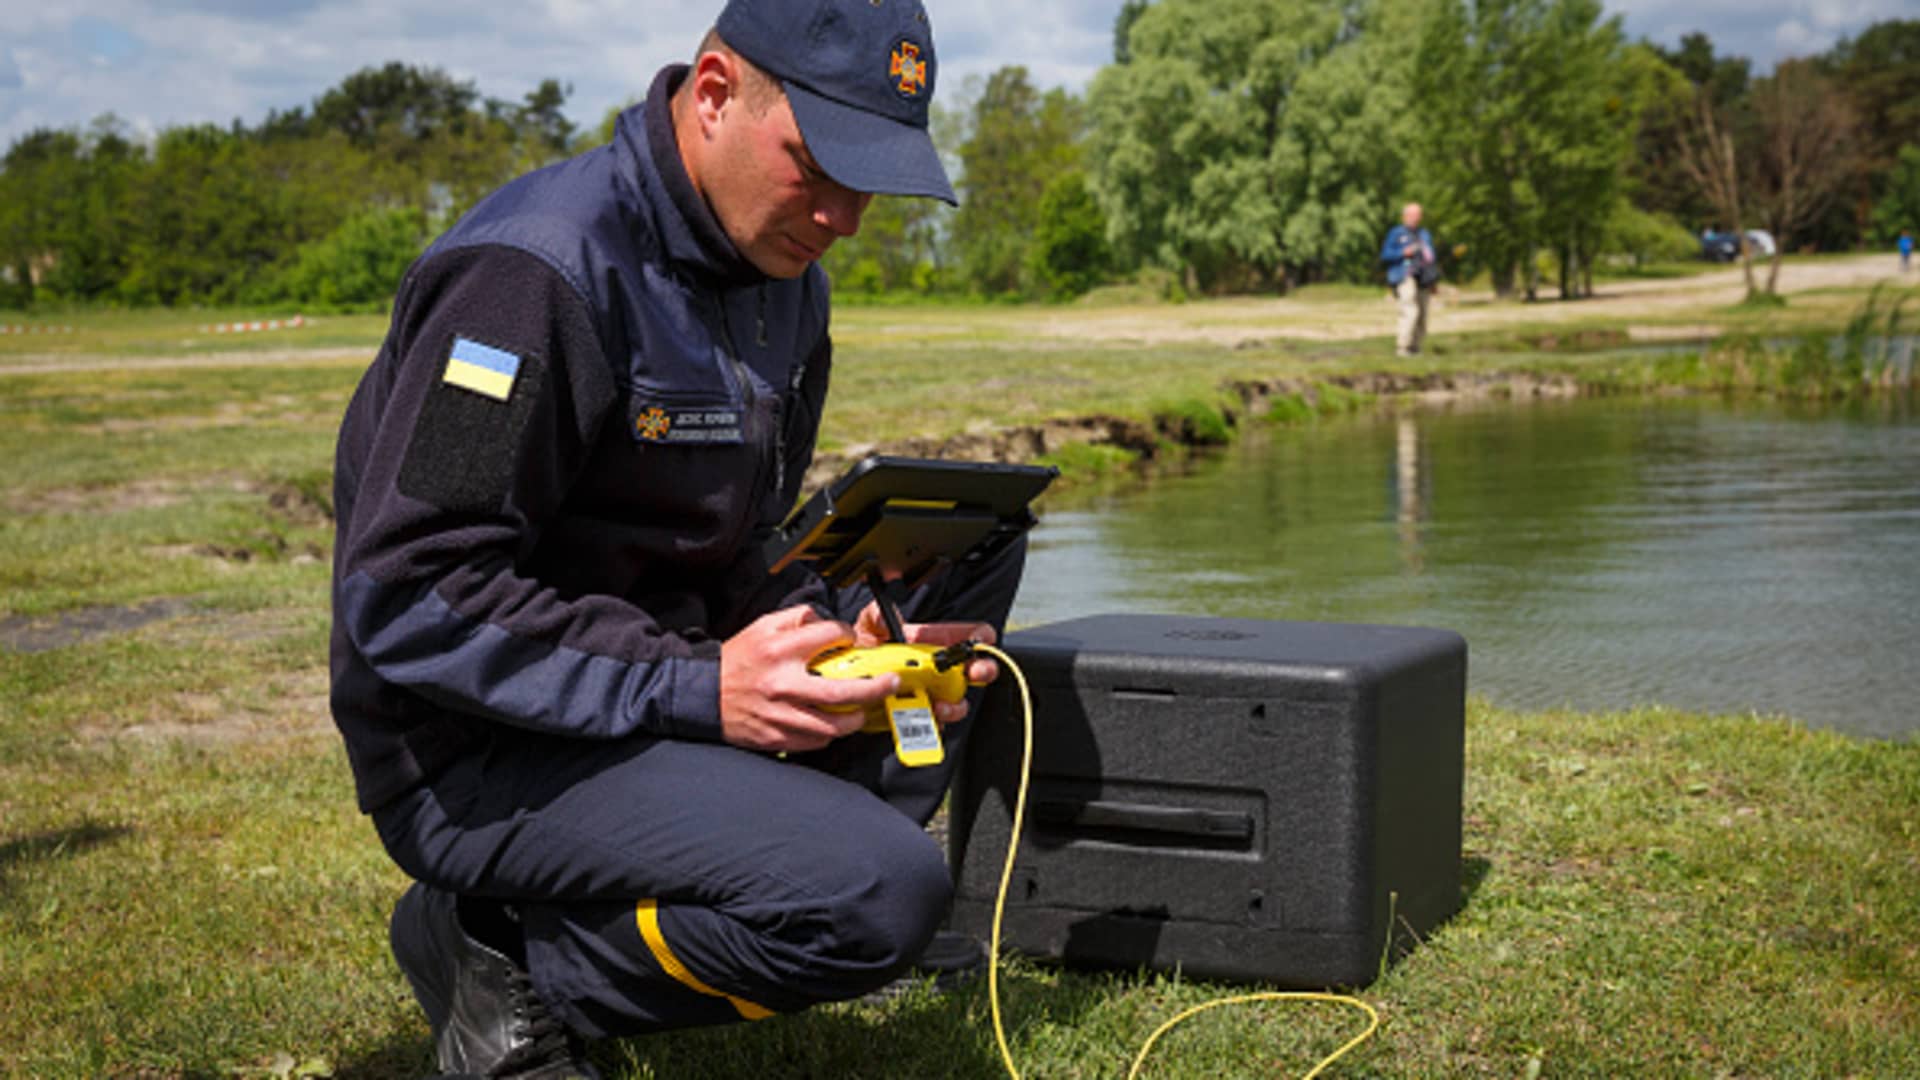 An employee of the State Emergency Service of Ukraine is inspecting the lake with the help of a drone in Kyiv, Ukraine on May 27, 2022.